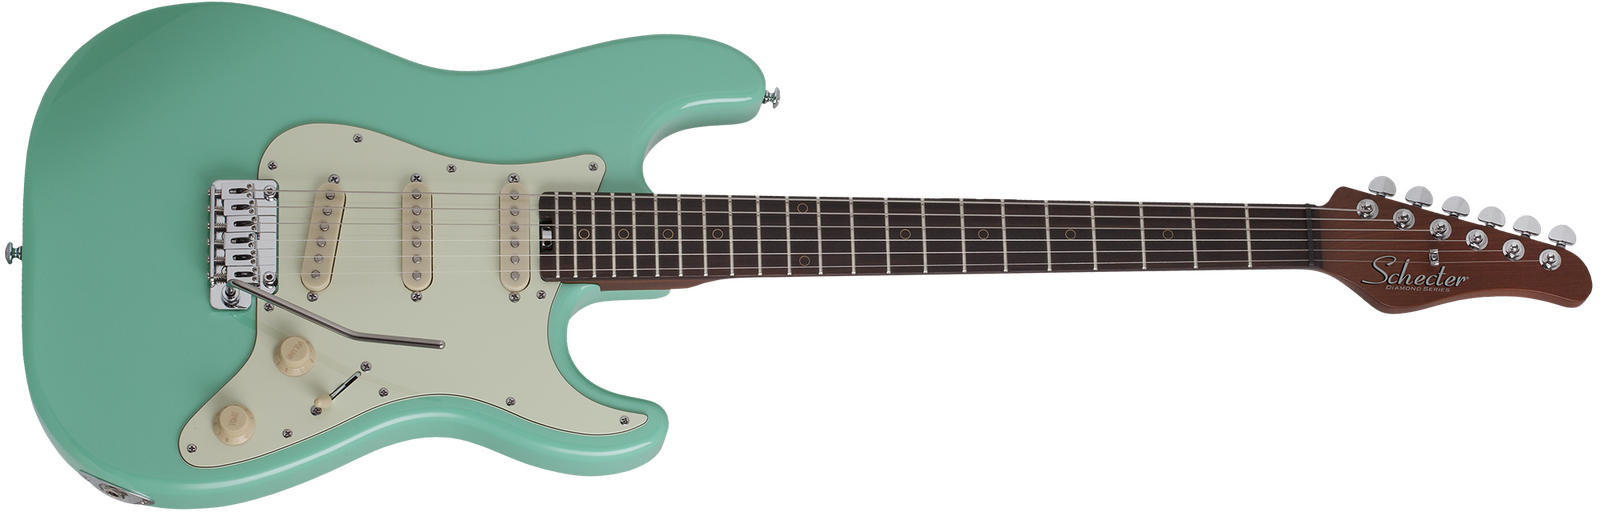 Schecter Nick Johnston Traditional Electric Guitar in Atomic Green